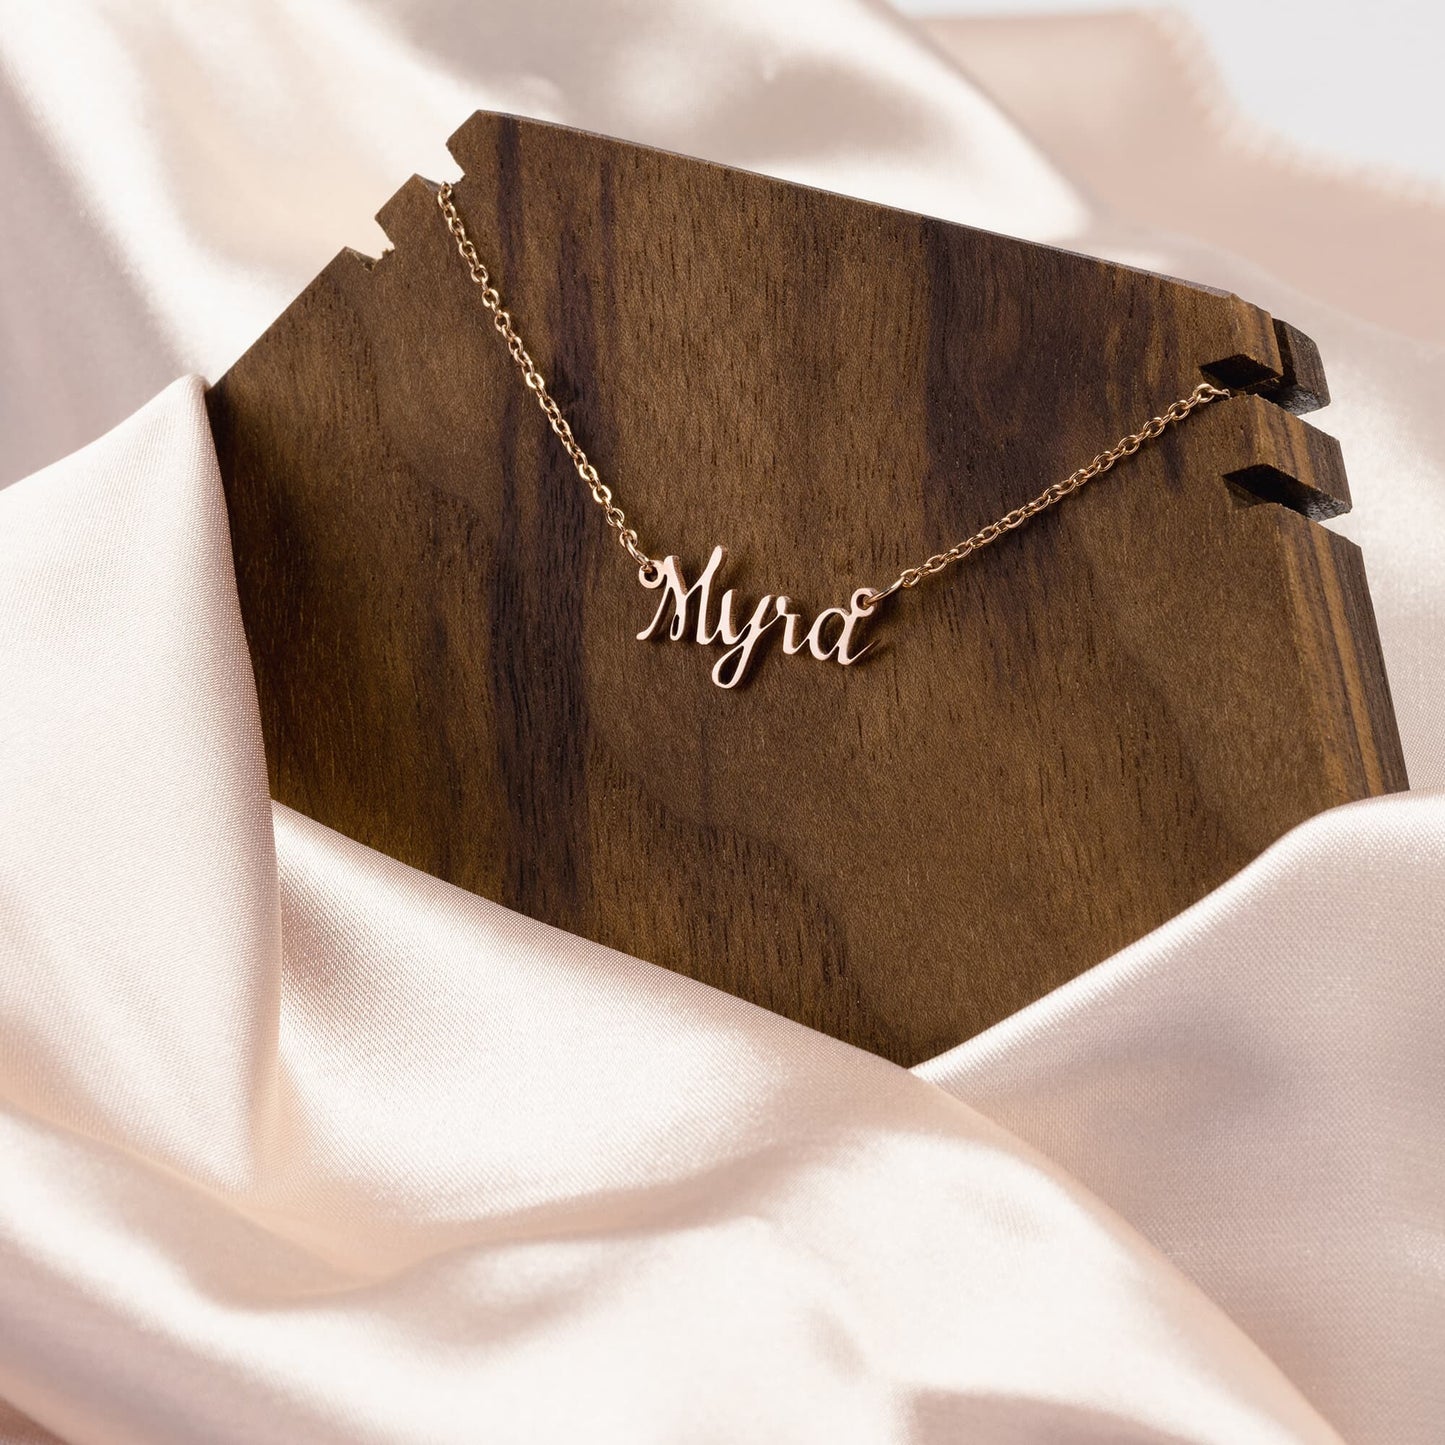 Personalized Name Necklace - Made in the USA using American Steel. - Broken Knuckle Apparel